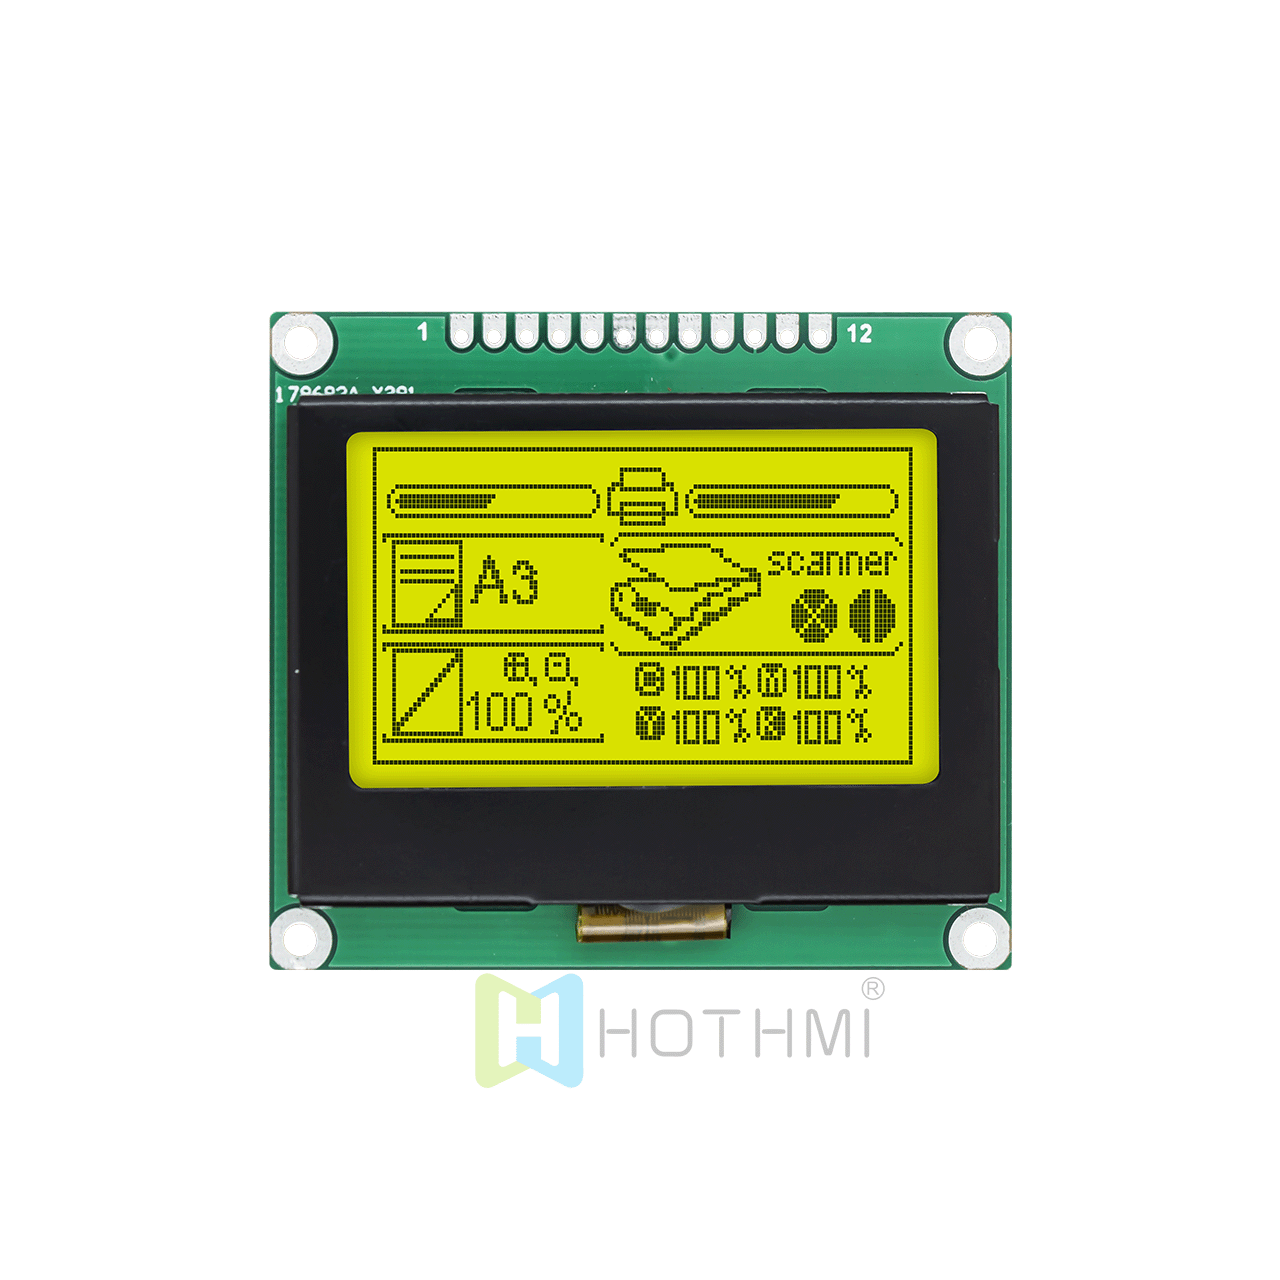 2 inch 128 x 64 LCD graphic display module | 12864 graphic dot matrix module | STN positive display yellow-green backlight | 3.3v